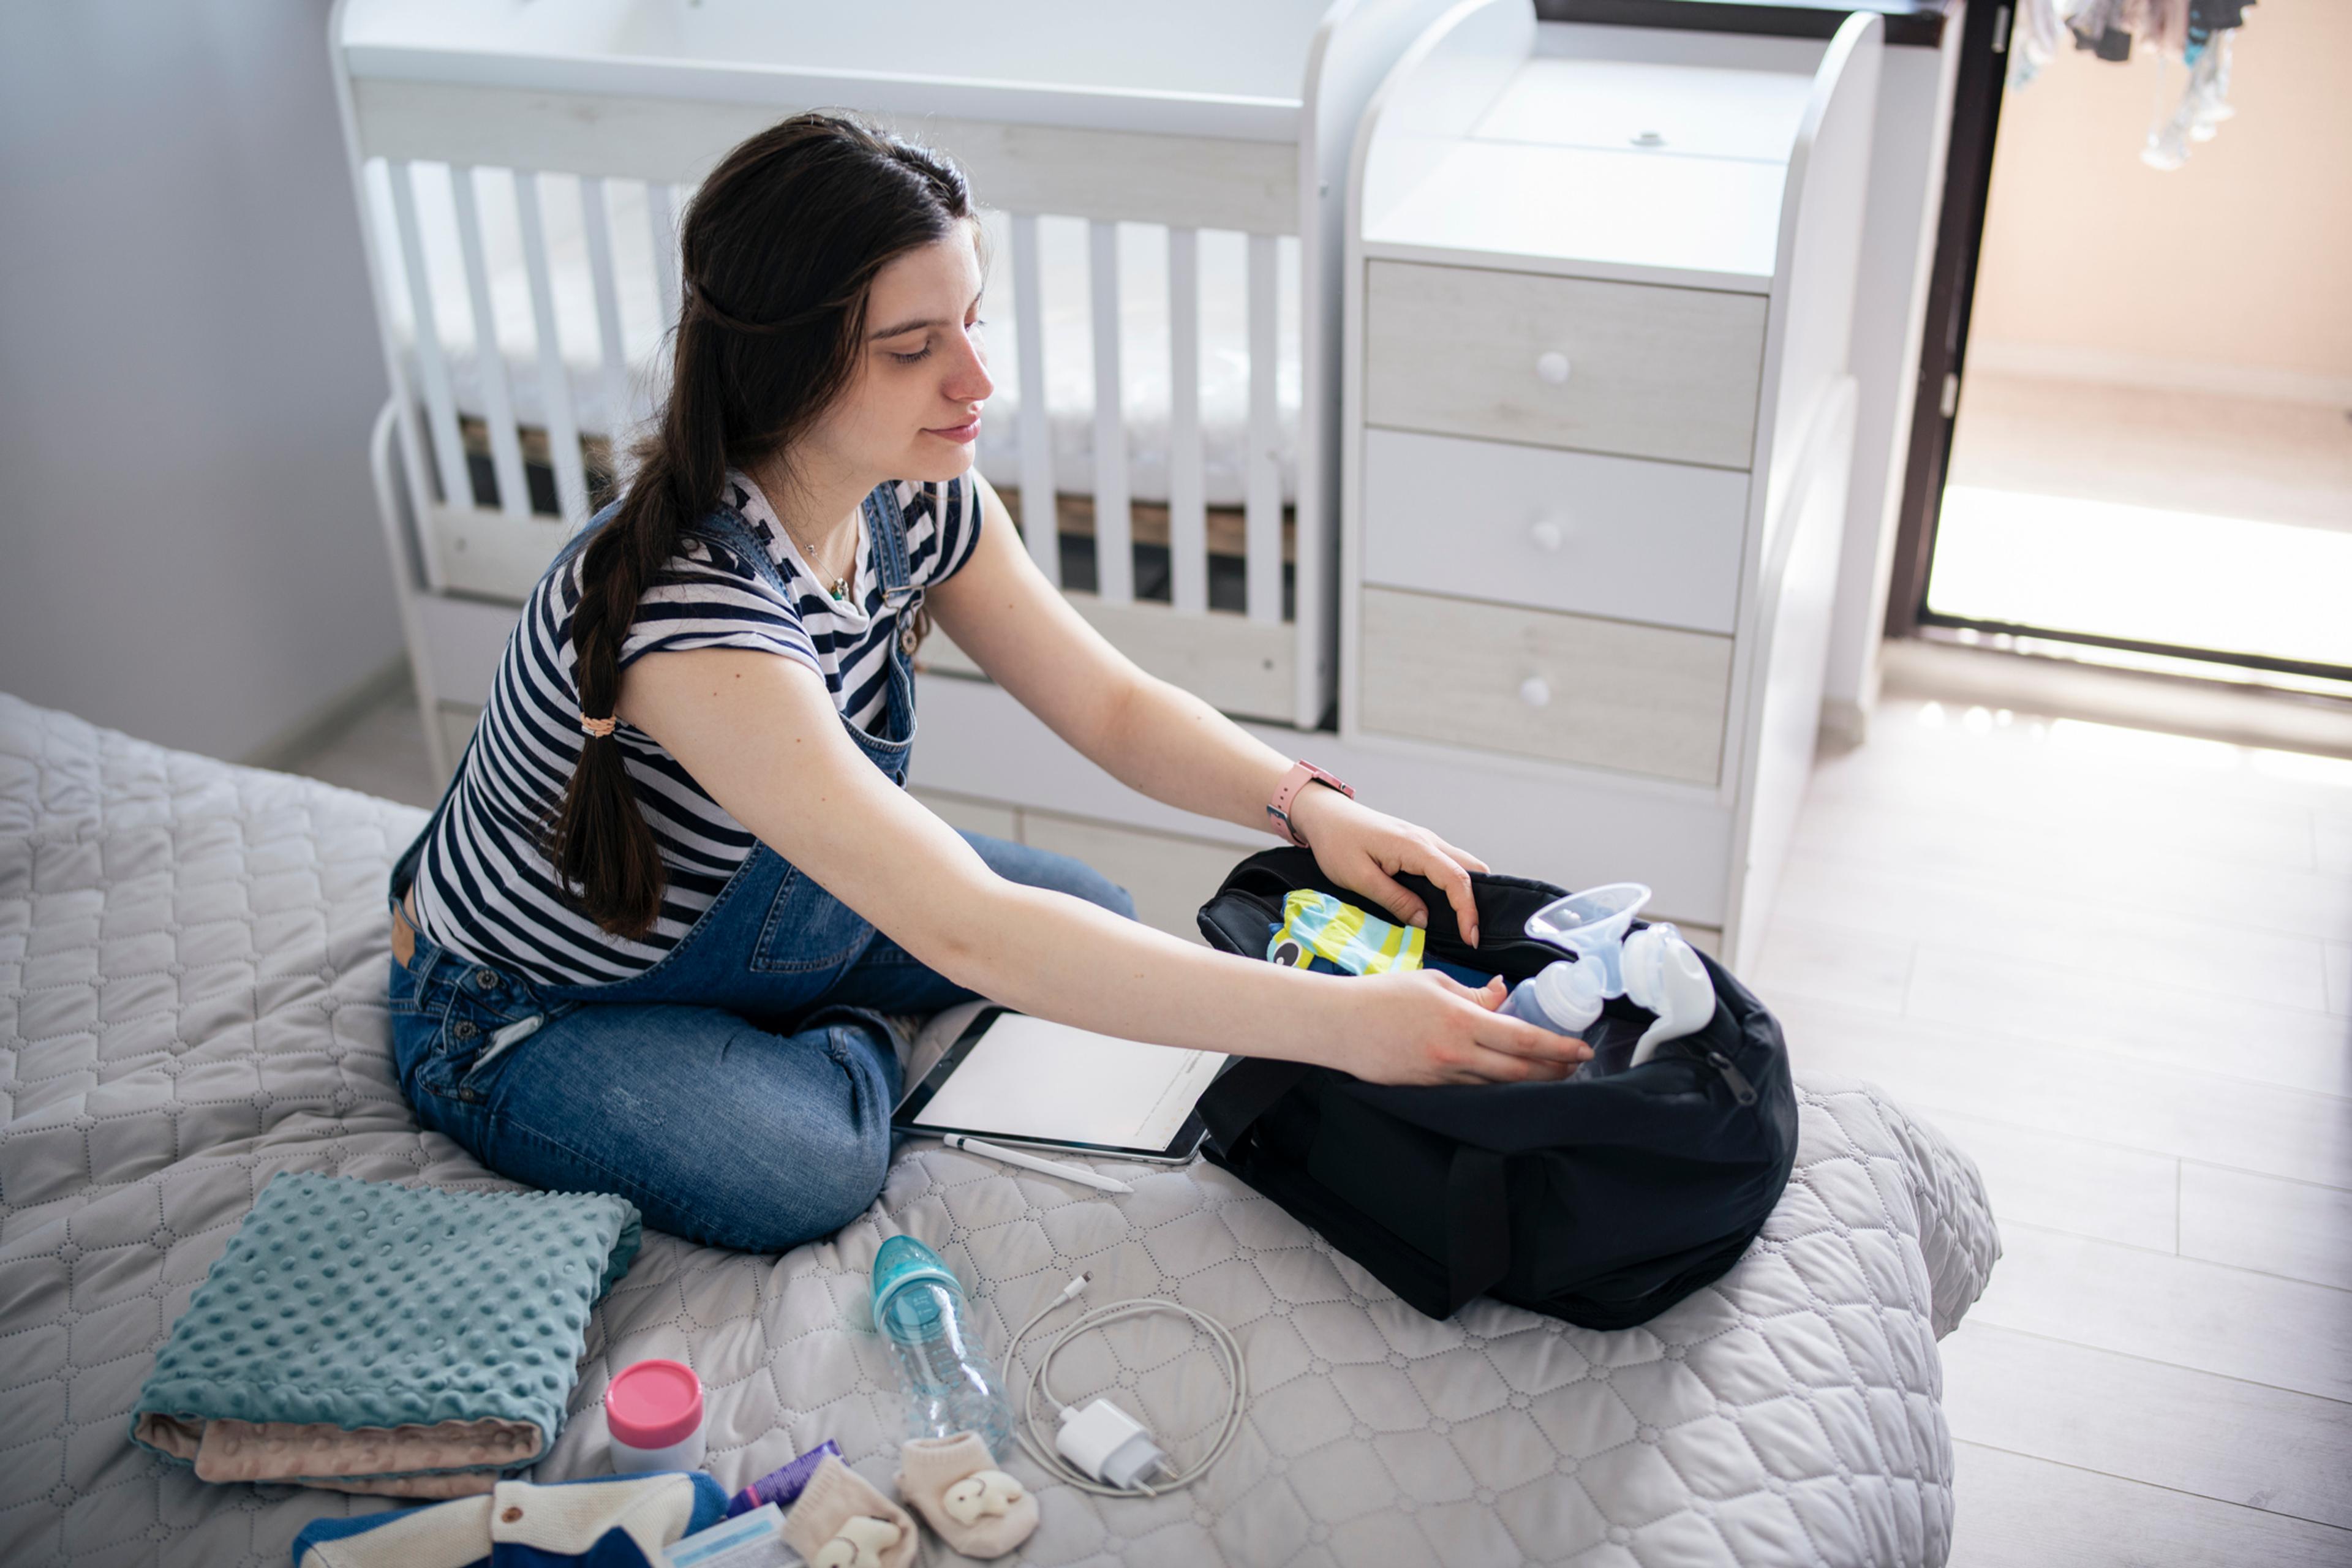 Pregnant woman preparing bag for the hospital for childbirth.